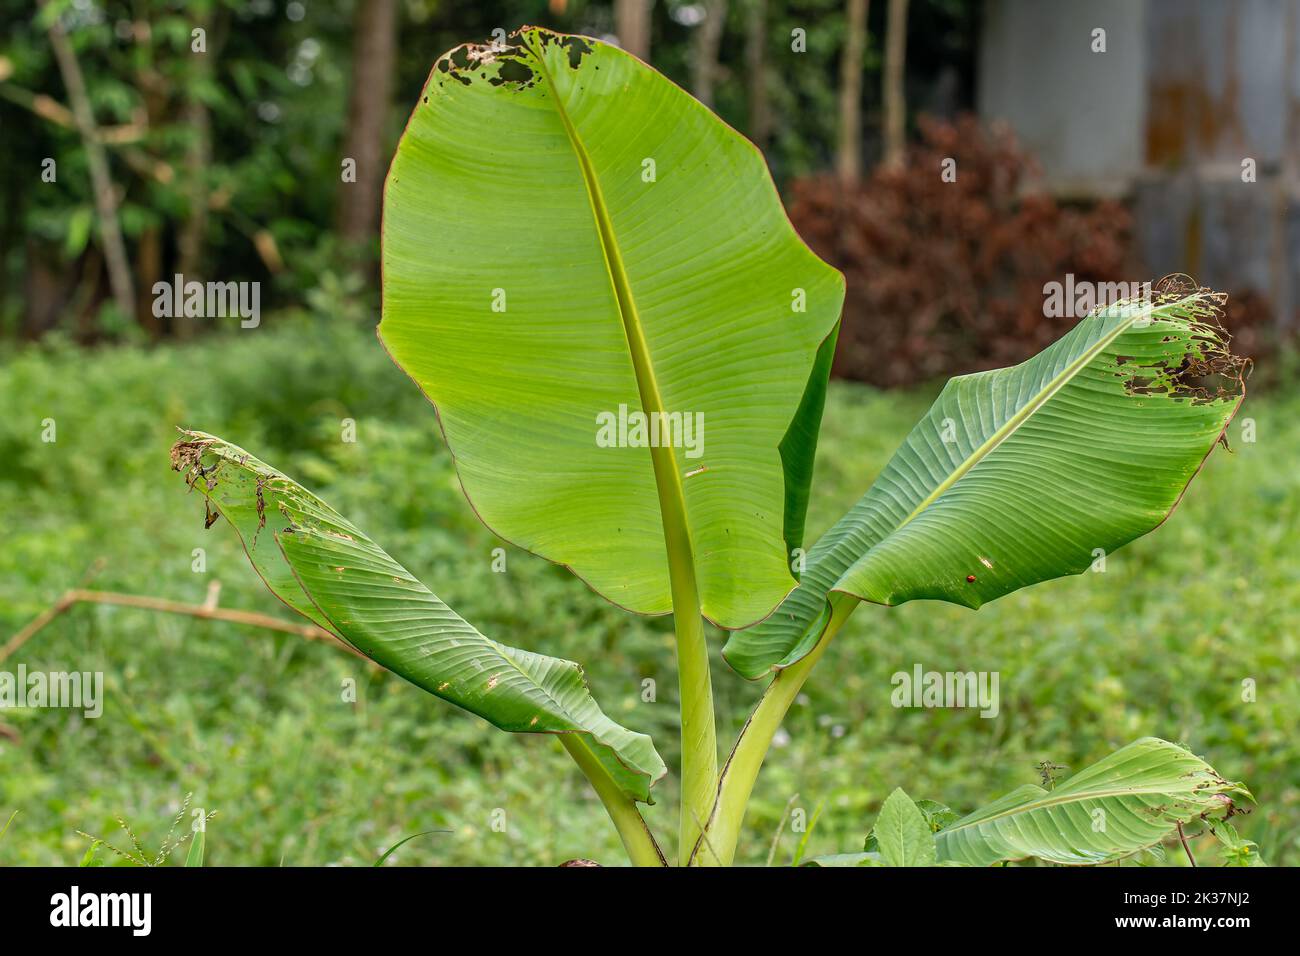 Green broad-leaved banana shoots whose leaf tips are eaten by caterpillars so that they have holes, the background of the green leaves is blurry Stock Photo